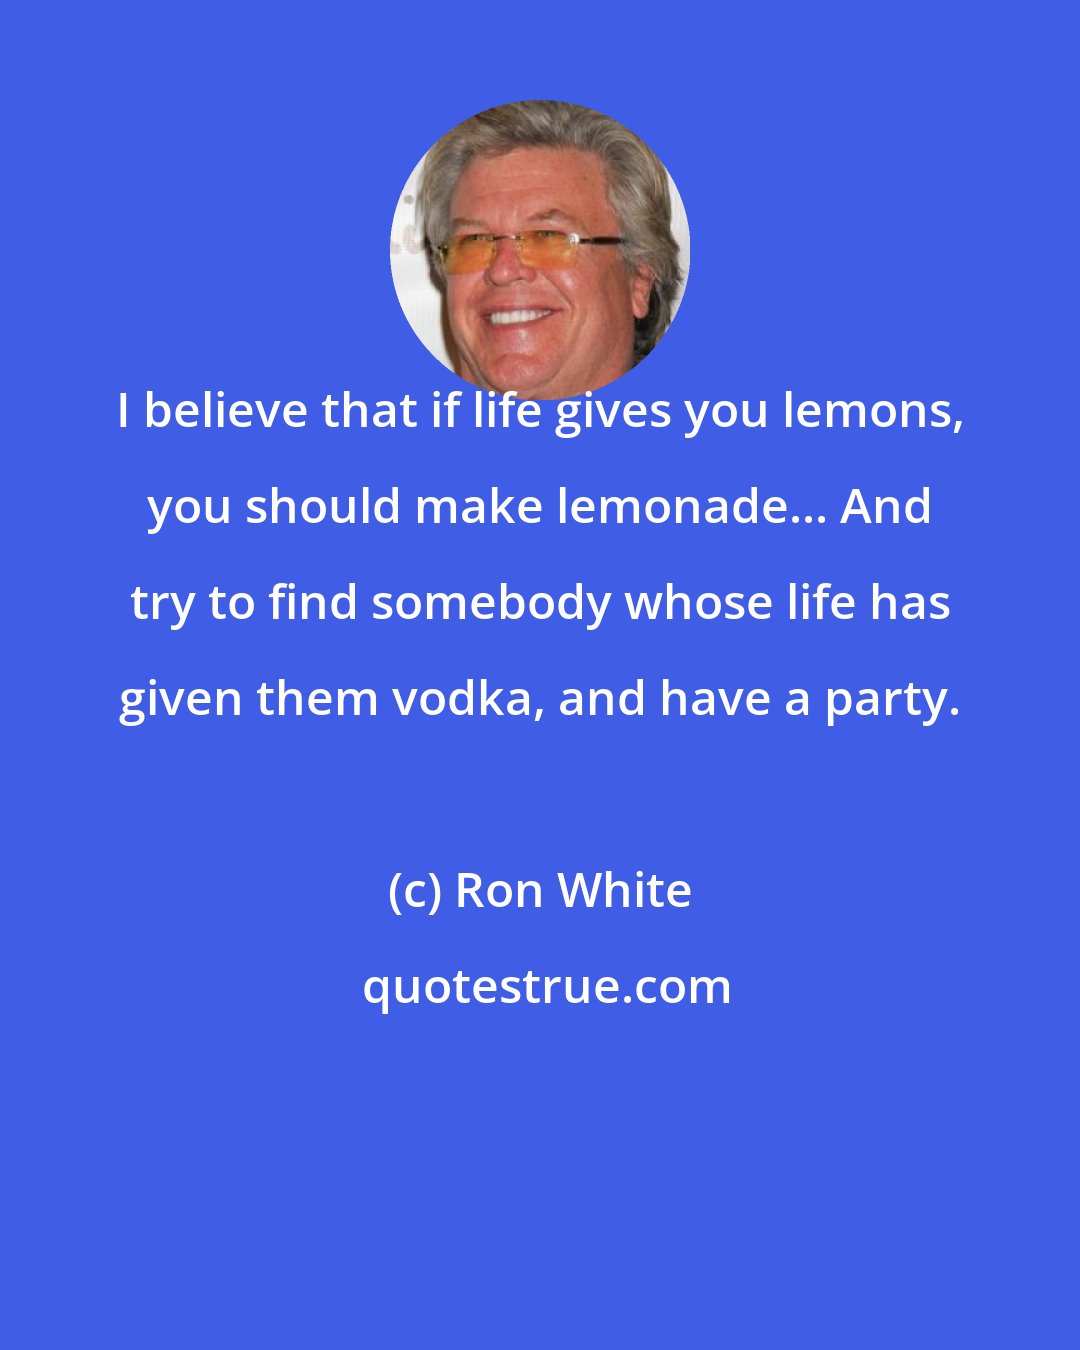 Ron White: I believe that if life gives you lemons, you should make lemonade... And try to find somebody whose life has given them vodka, and have a party.